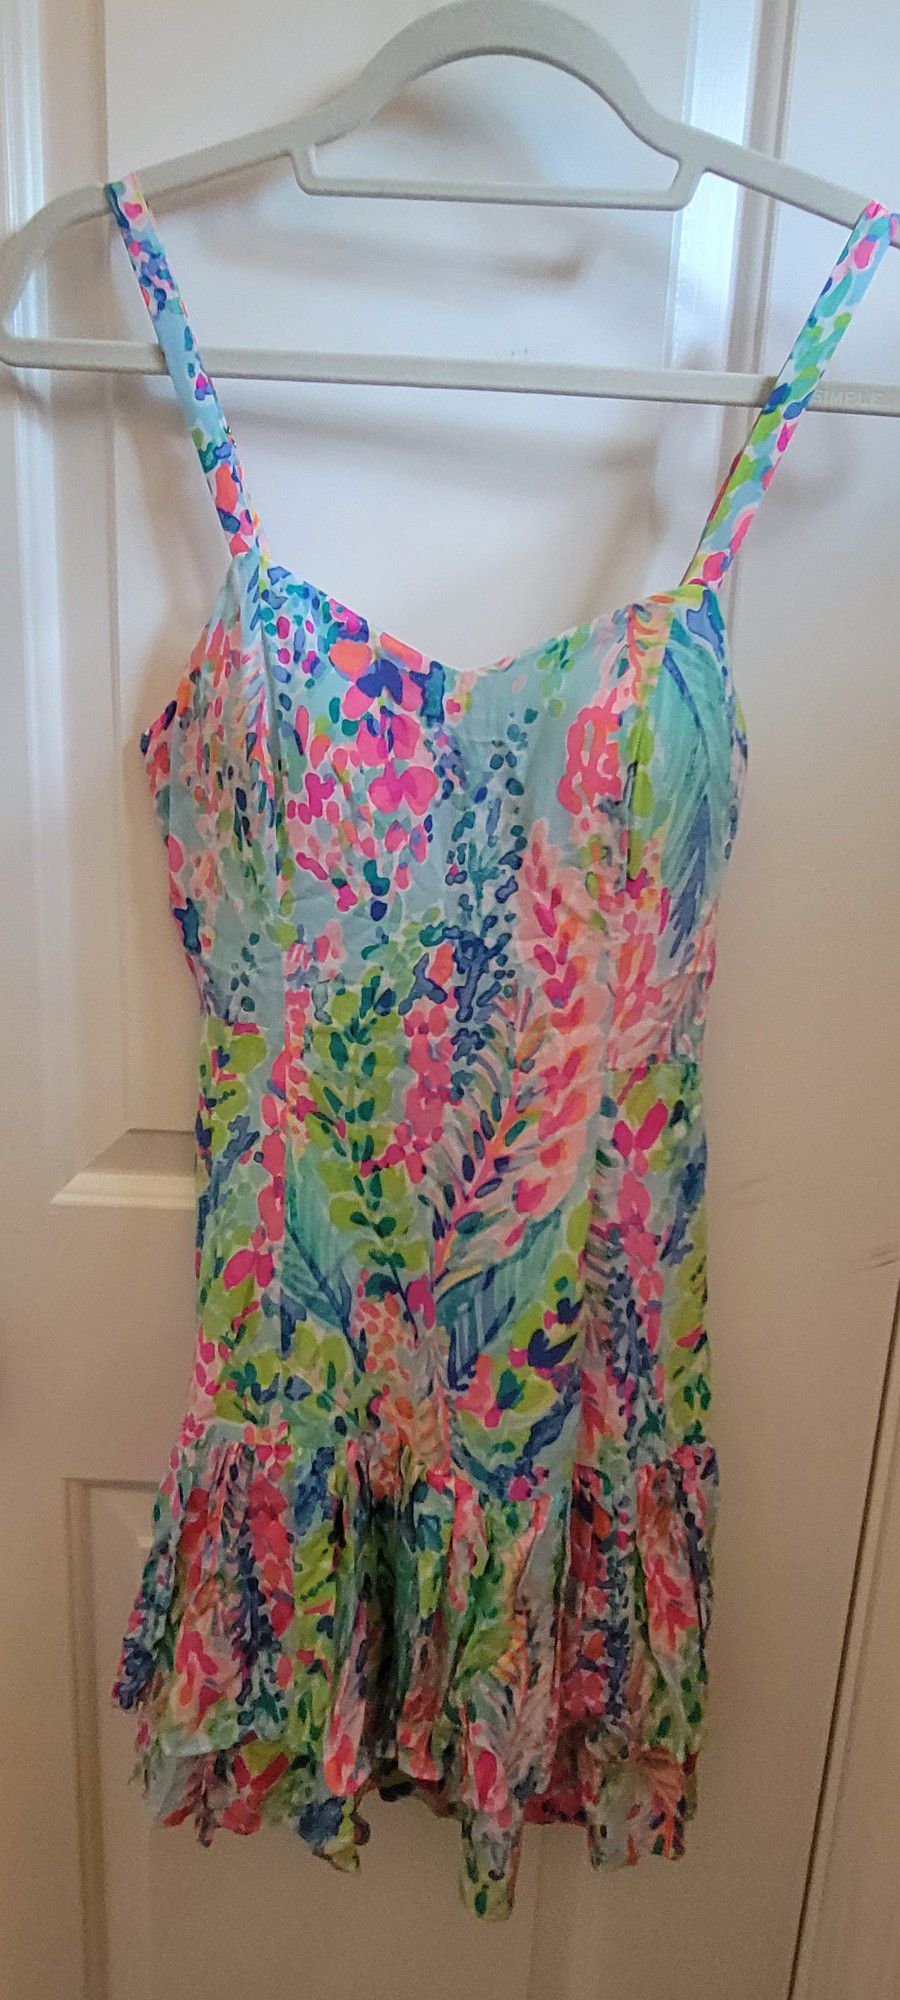 Lilly Pulitzer Summer Dress - size 00